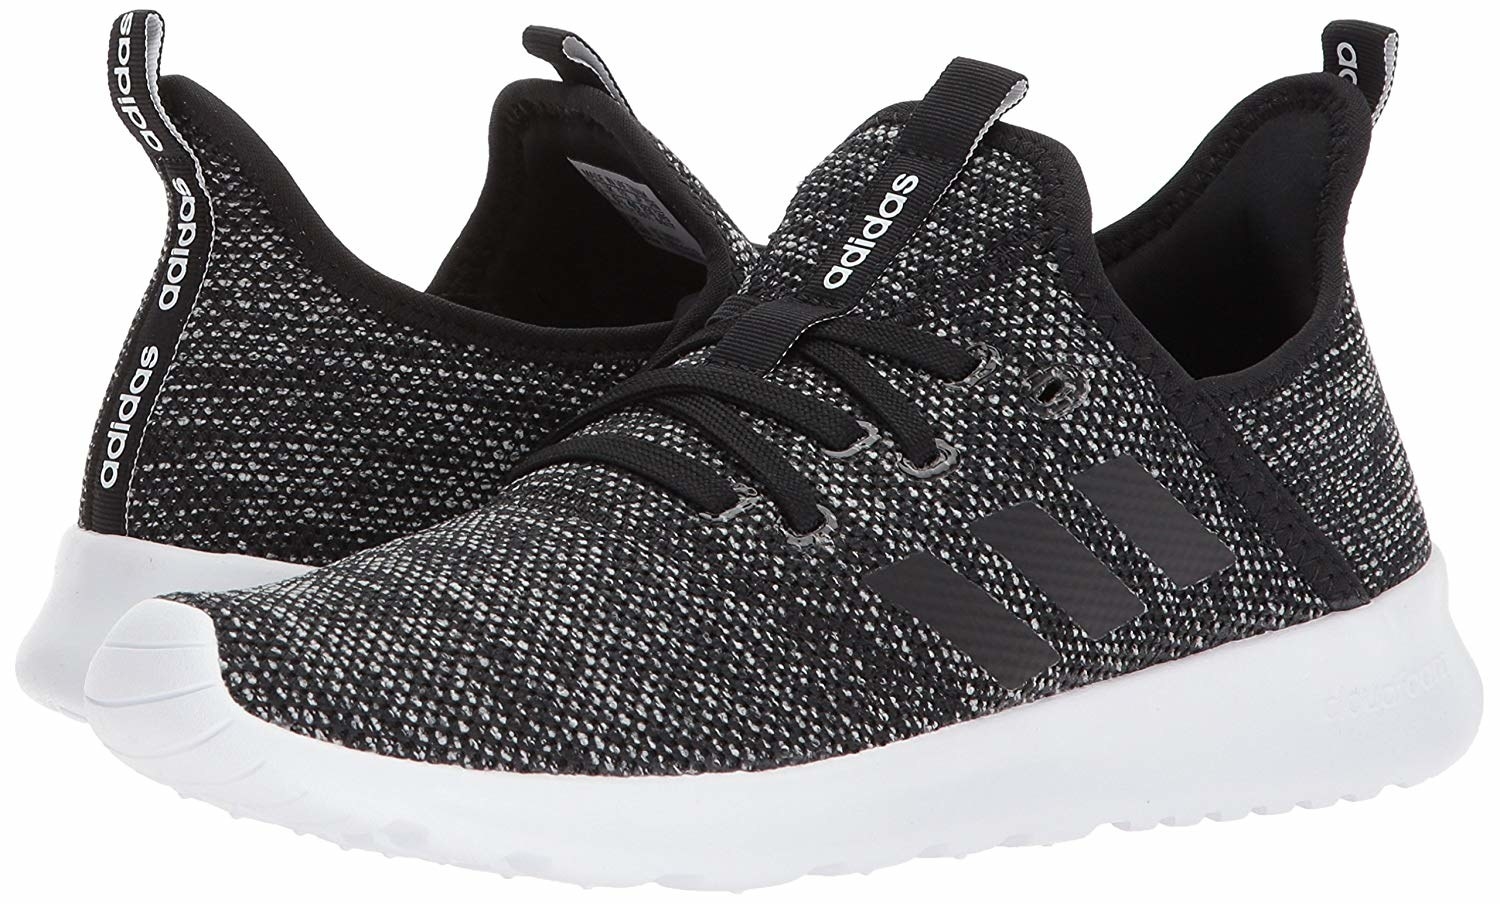 adidas cloudfoam shoes in black and grey 